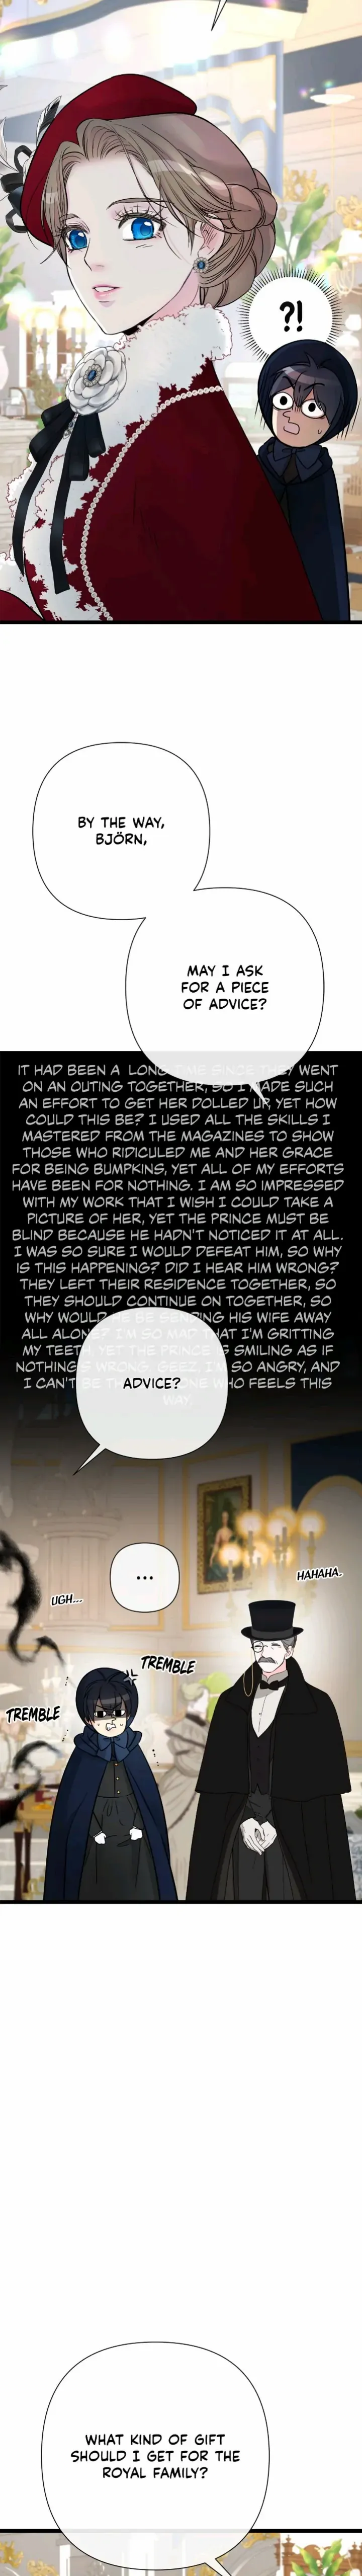 The Problematic Prince - Page 2